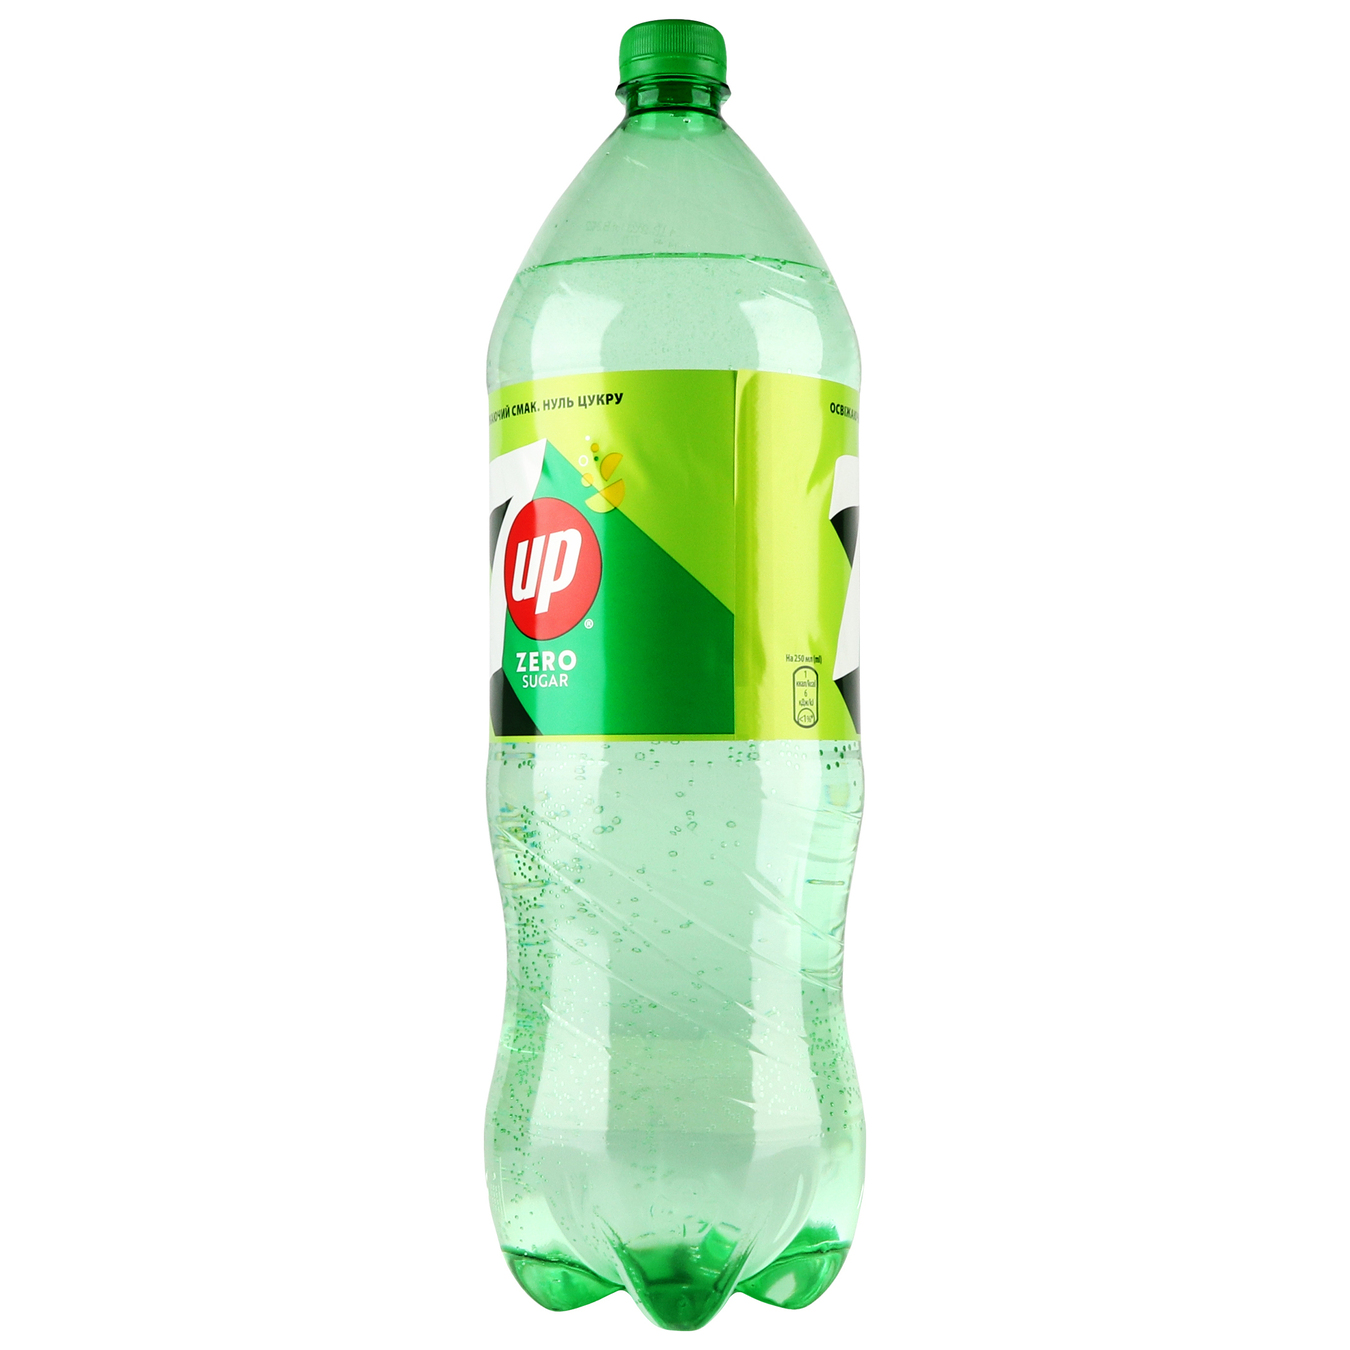  Carbonated drink 7 UP Free 2 l 3